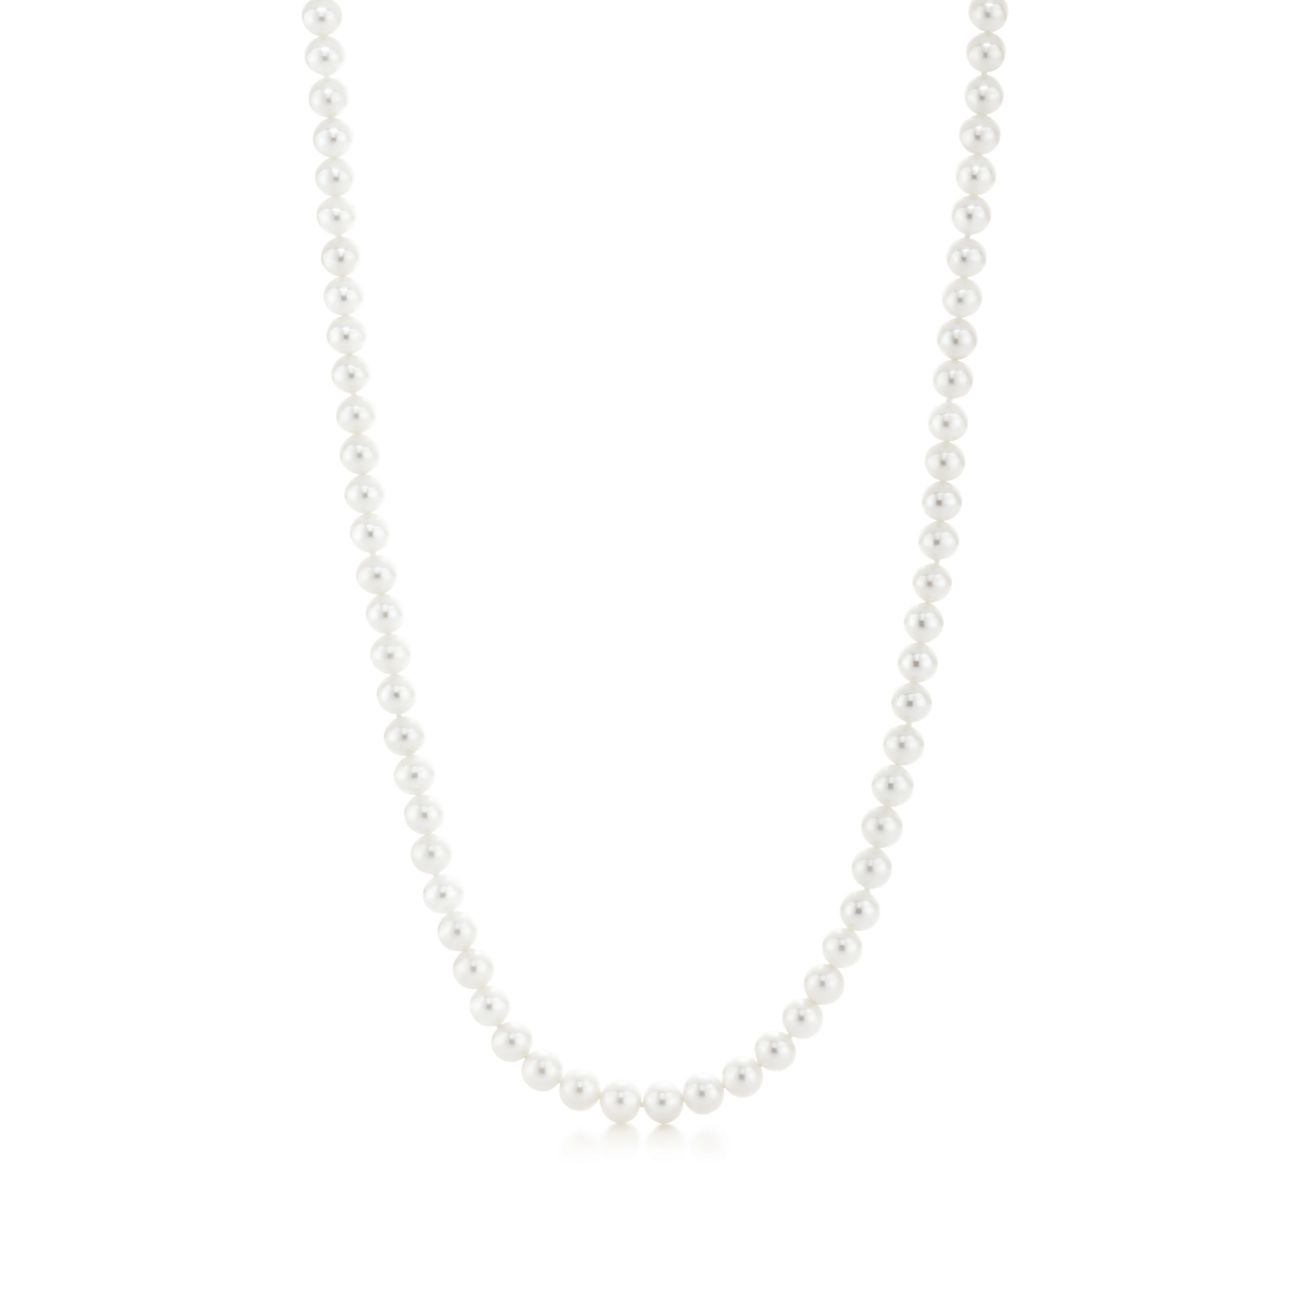 Ziegfeld Collection Pearl Necklace with a Silver Clasp, 6-7 mm | Tiffany & Co.